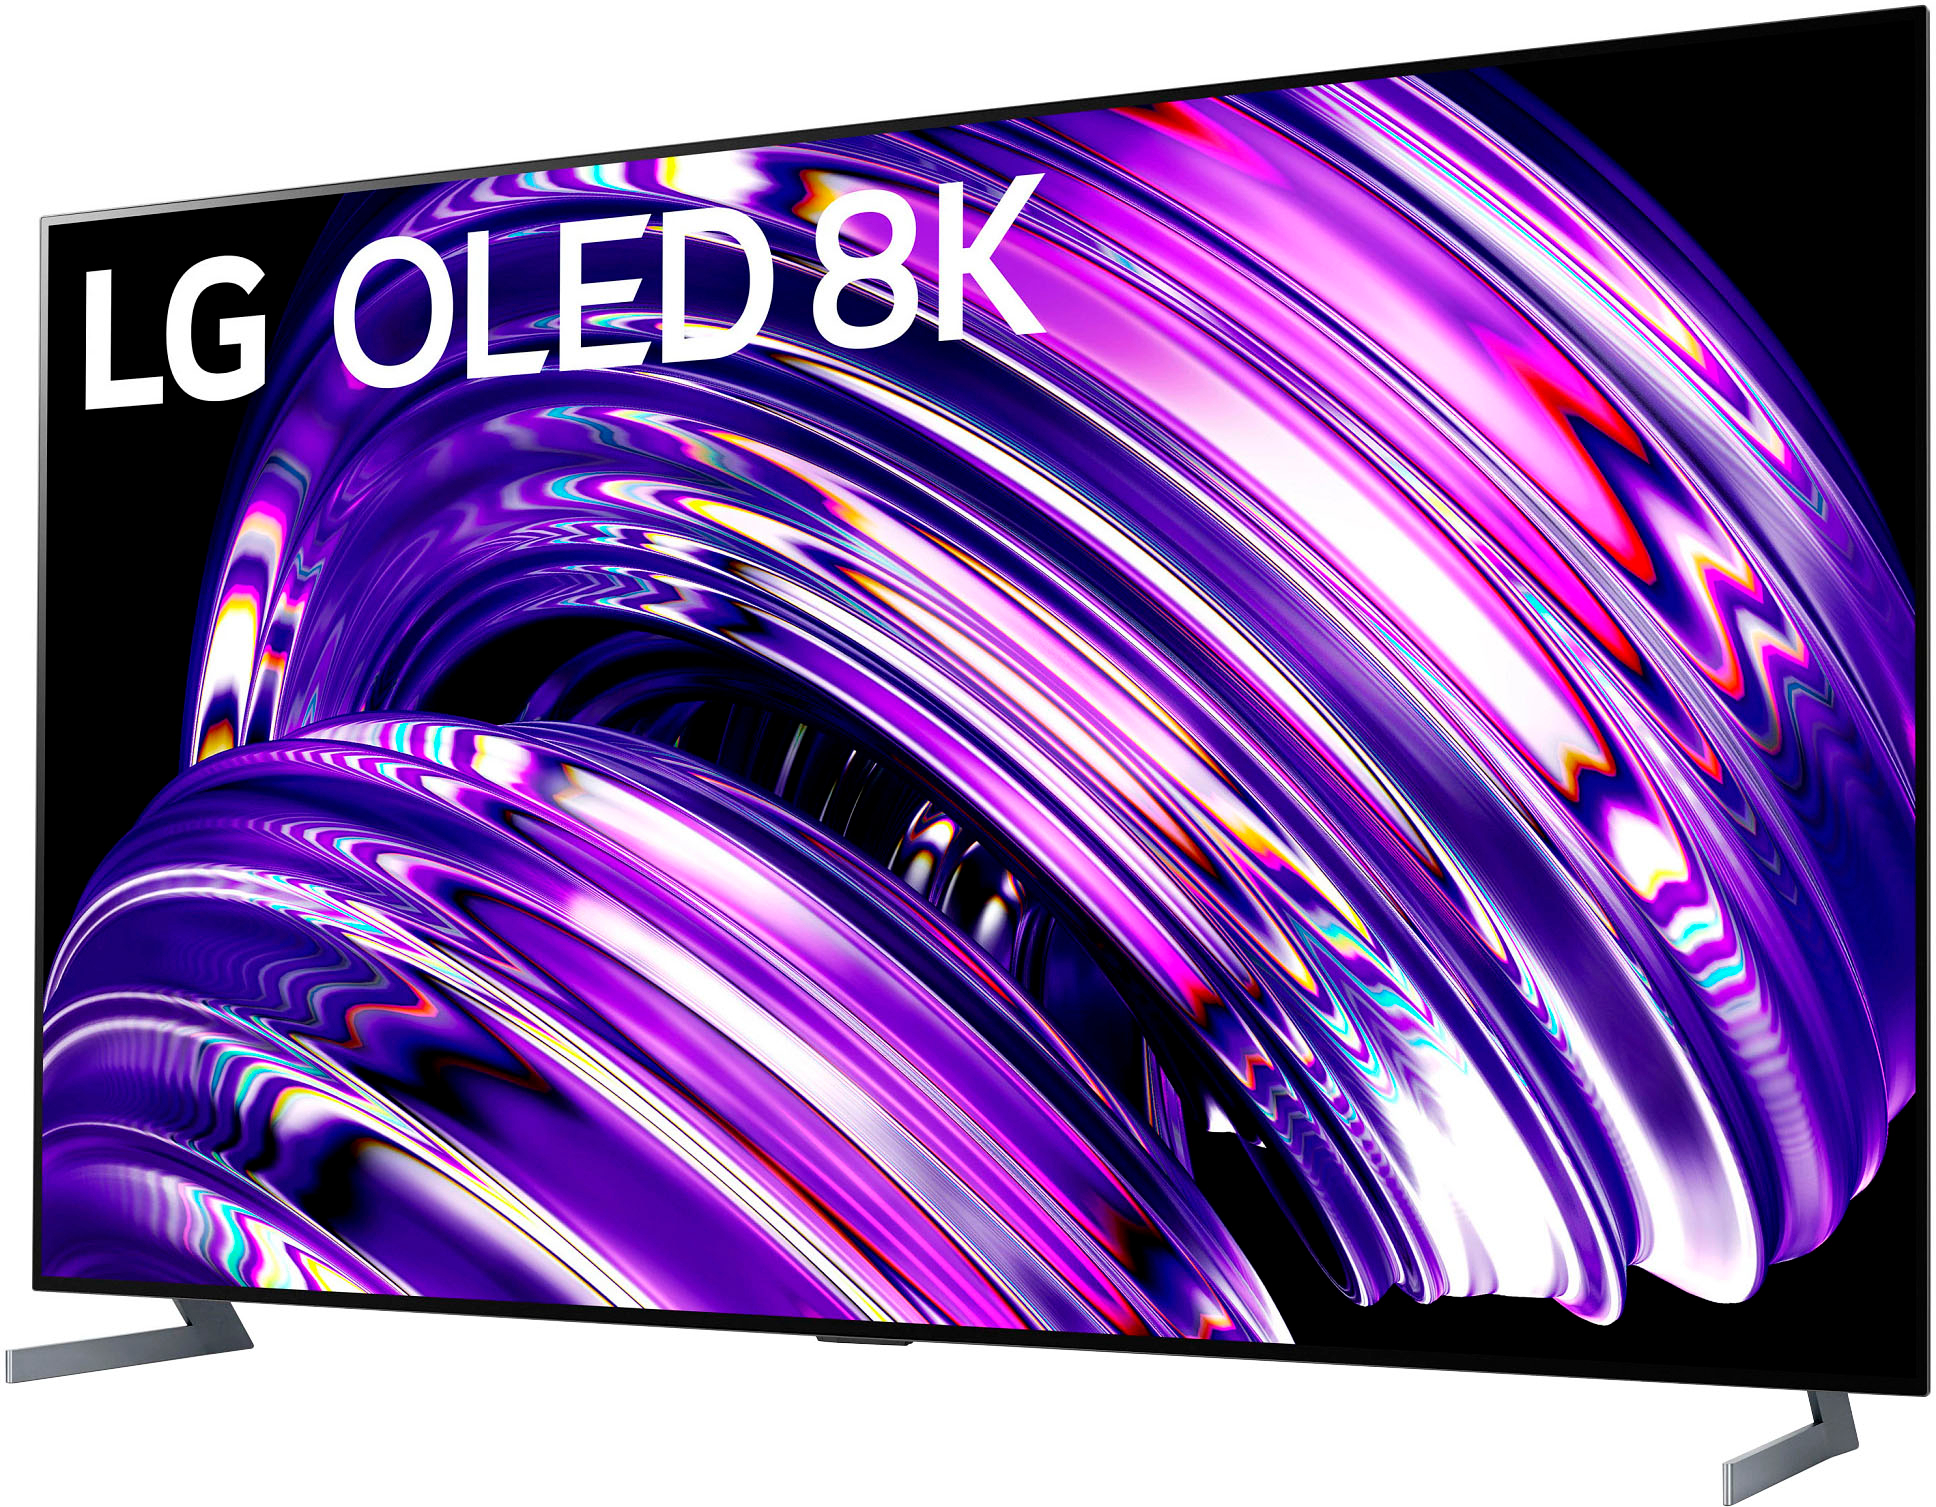 Back View: LG - 65" Class G1 Series OLED evo 4K UHD Smart webOS TV with Gallery Design